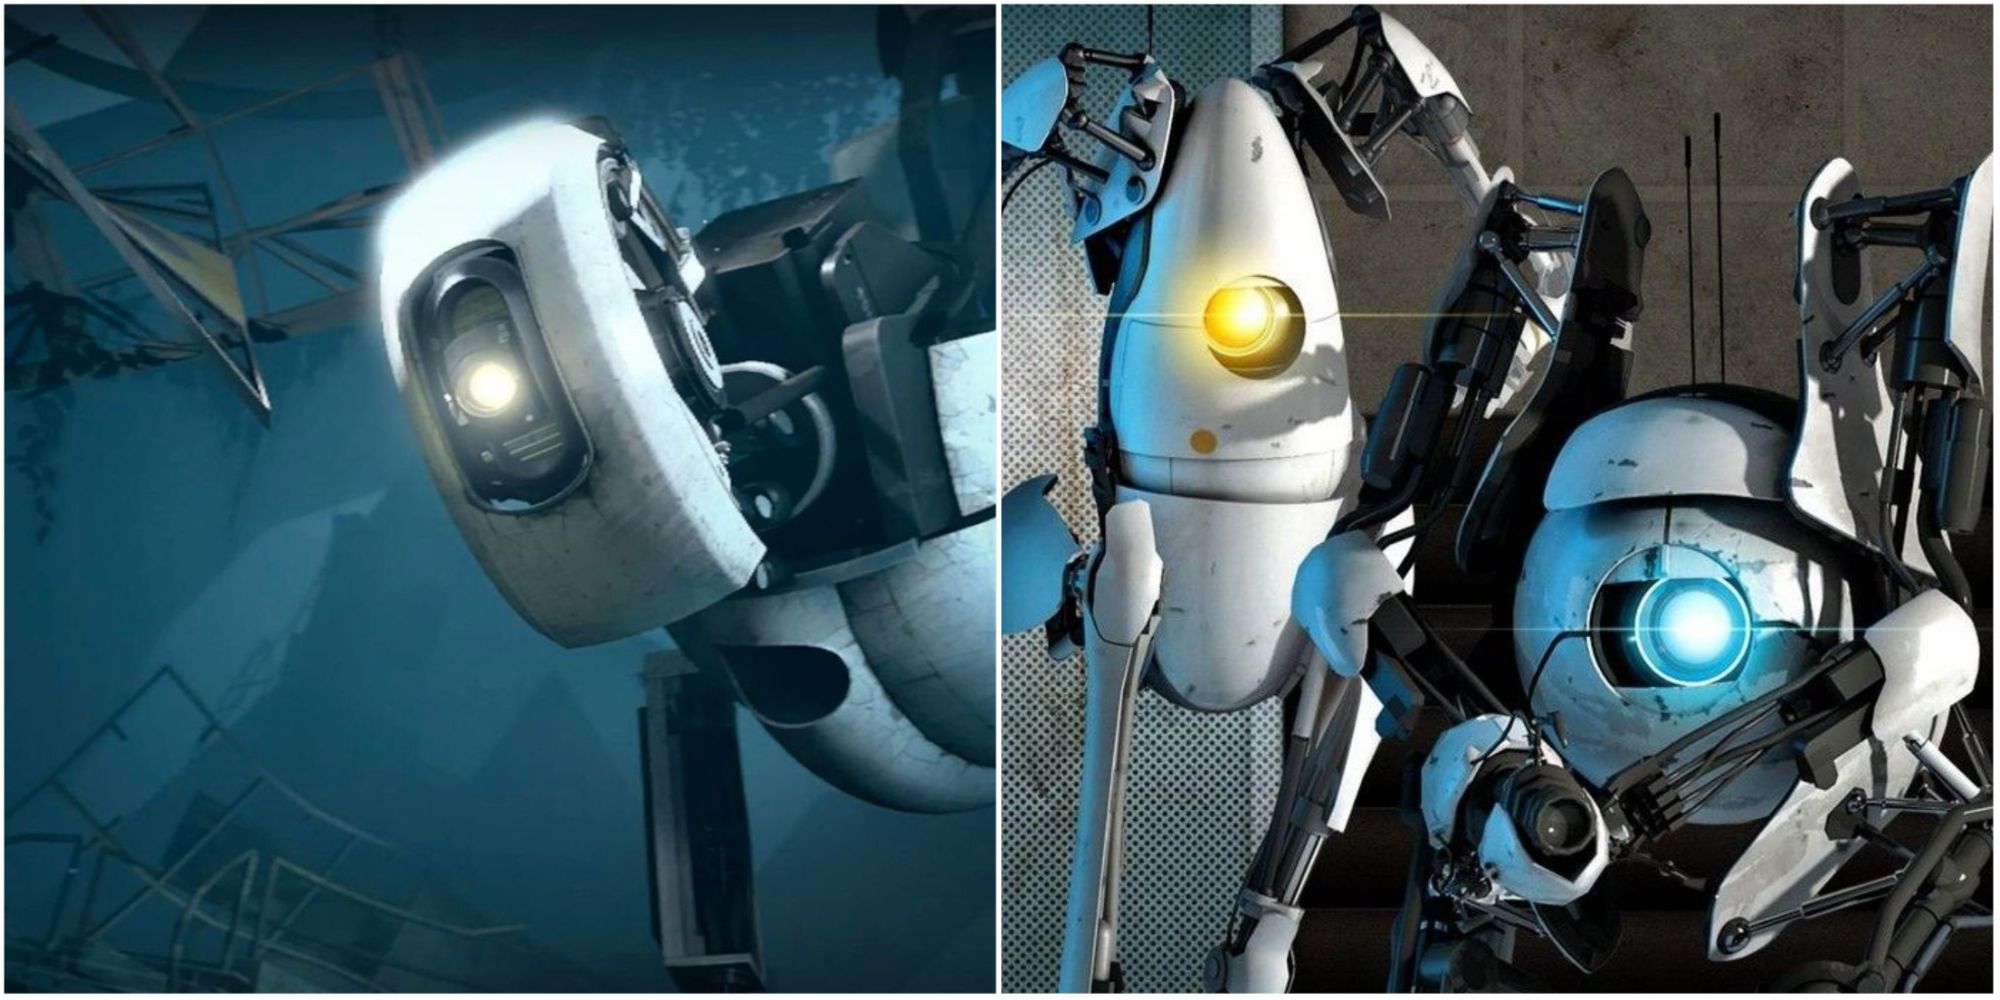 Portal 2 Better Than Other Games Featured Split Image